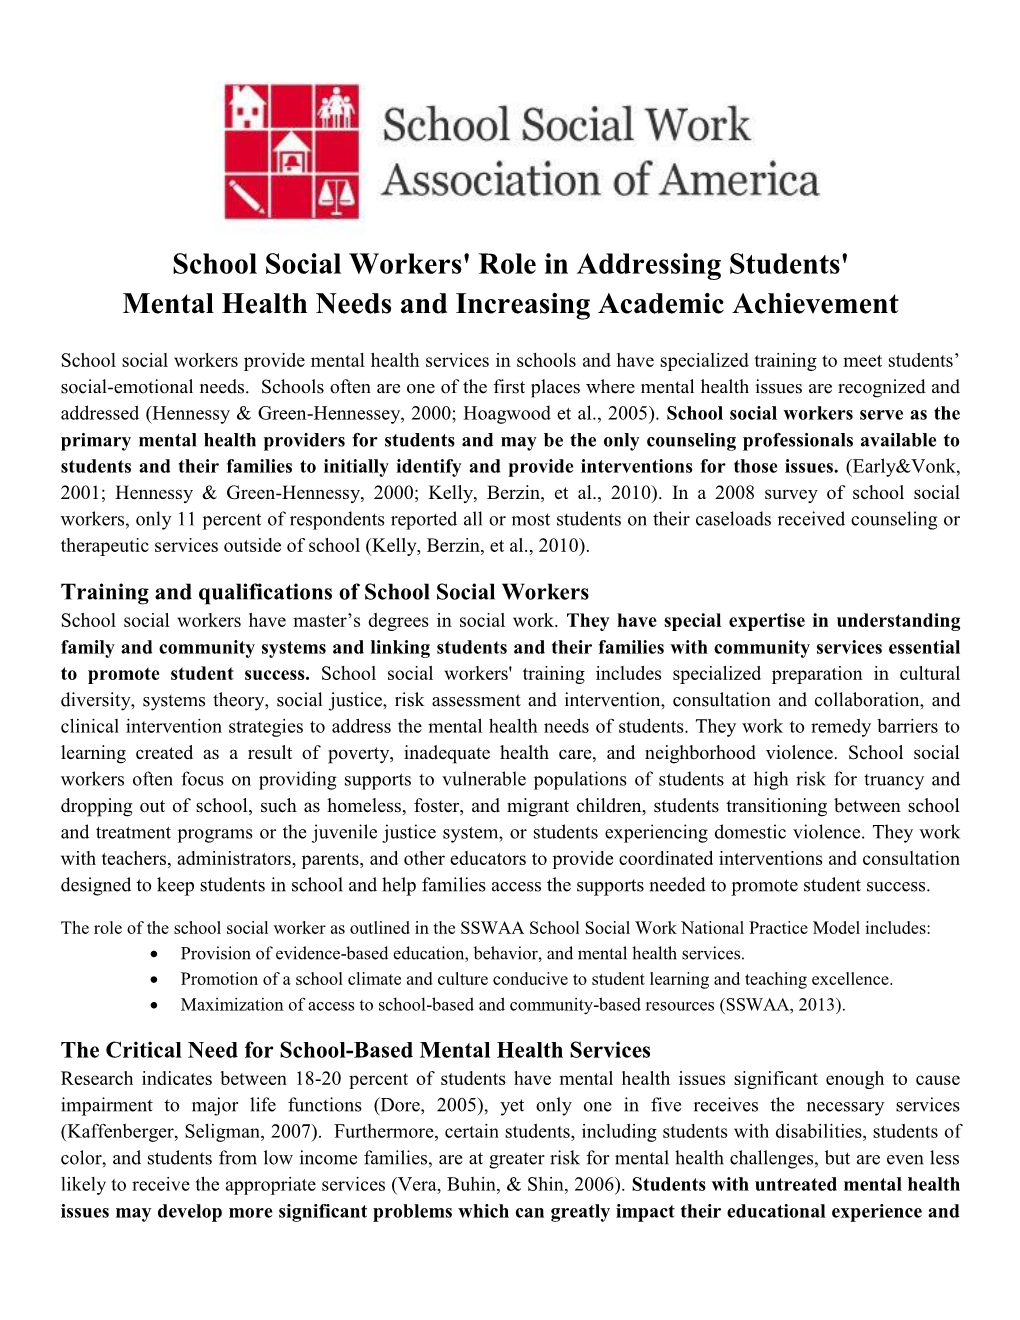 School Social Workers' Role in Addressing Students' Mental Health Needs and Increasing Academic Achievement